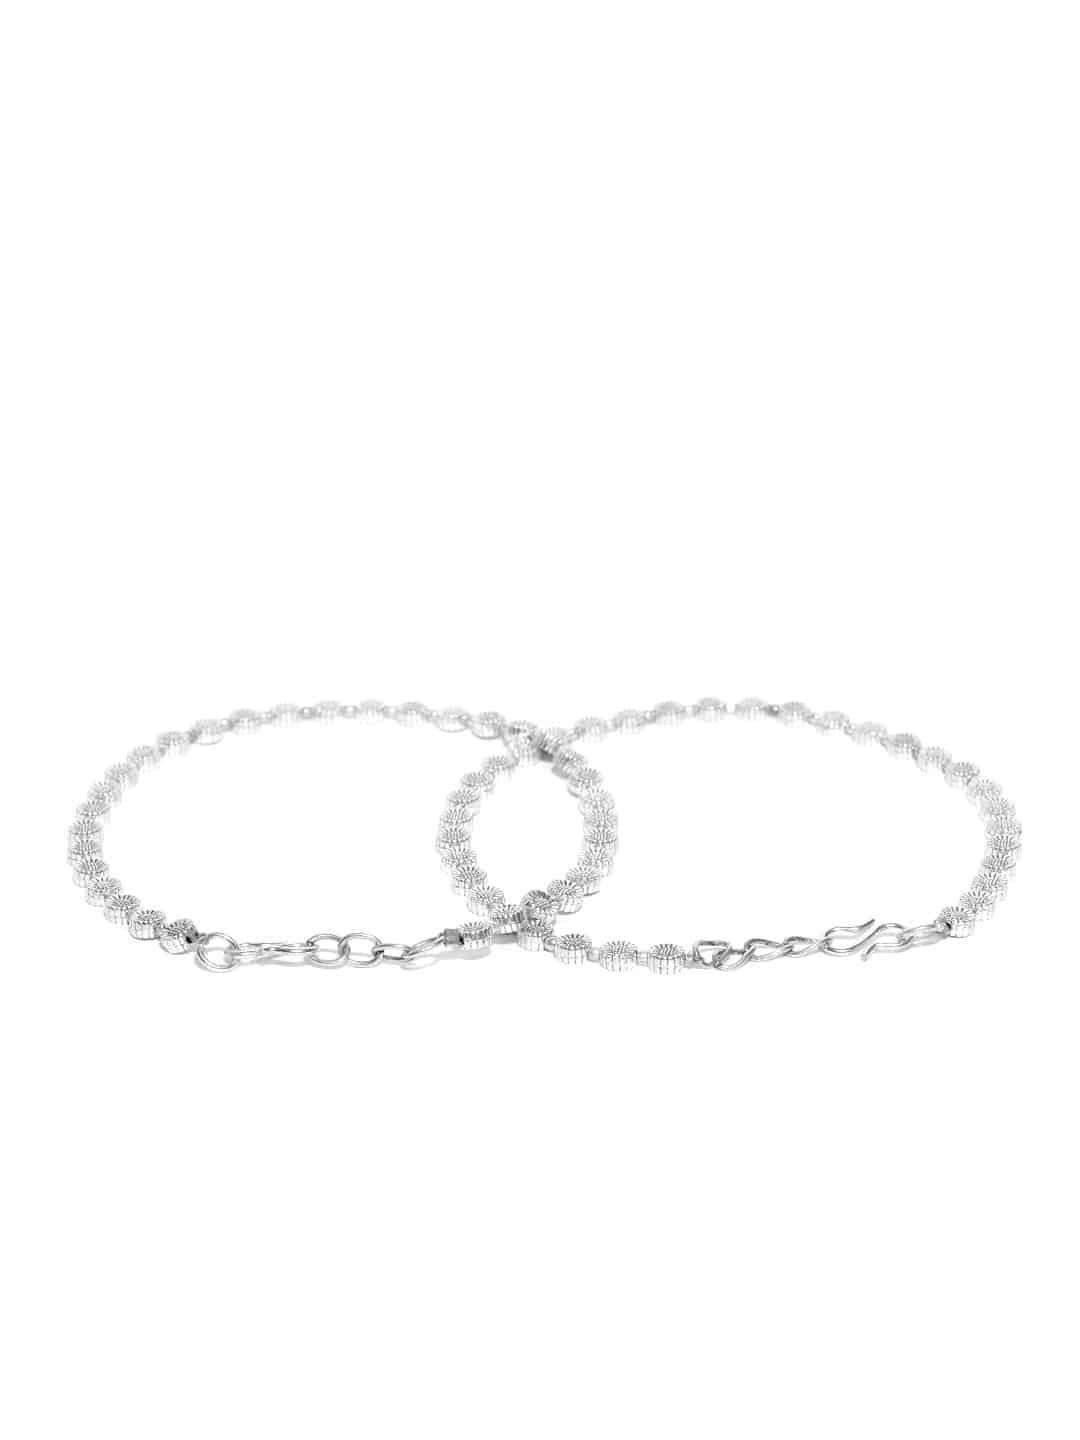 Oxidised Silver Circular Pattern Handcrafted Anklets Set Of 2